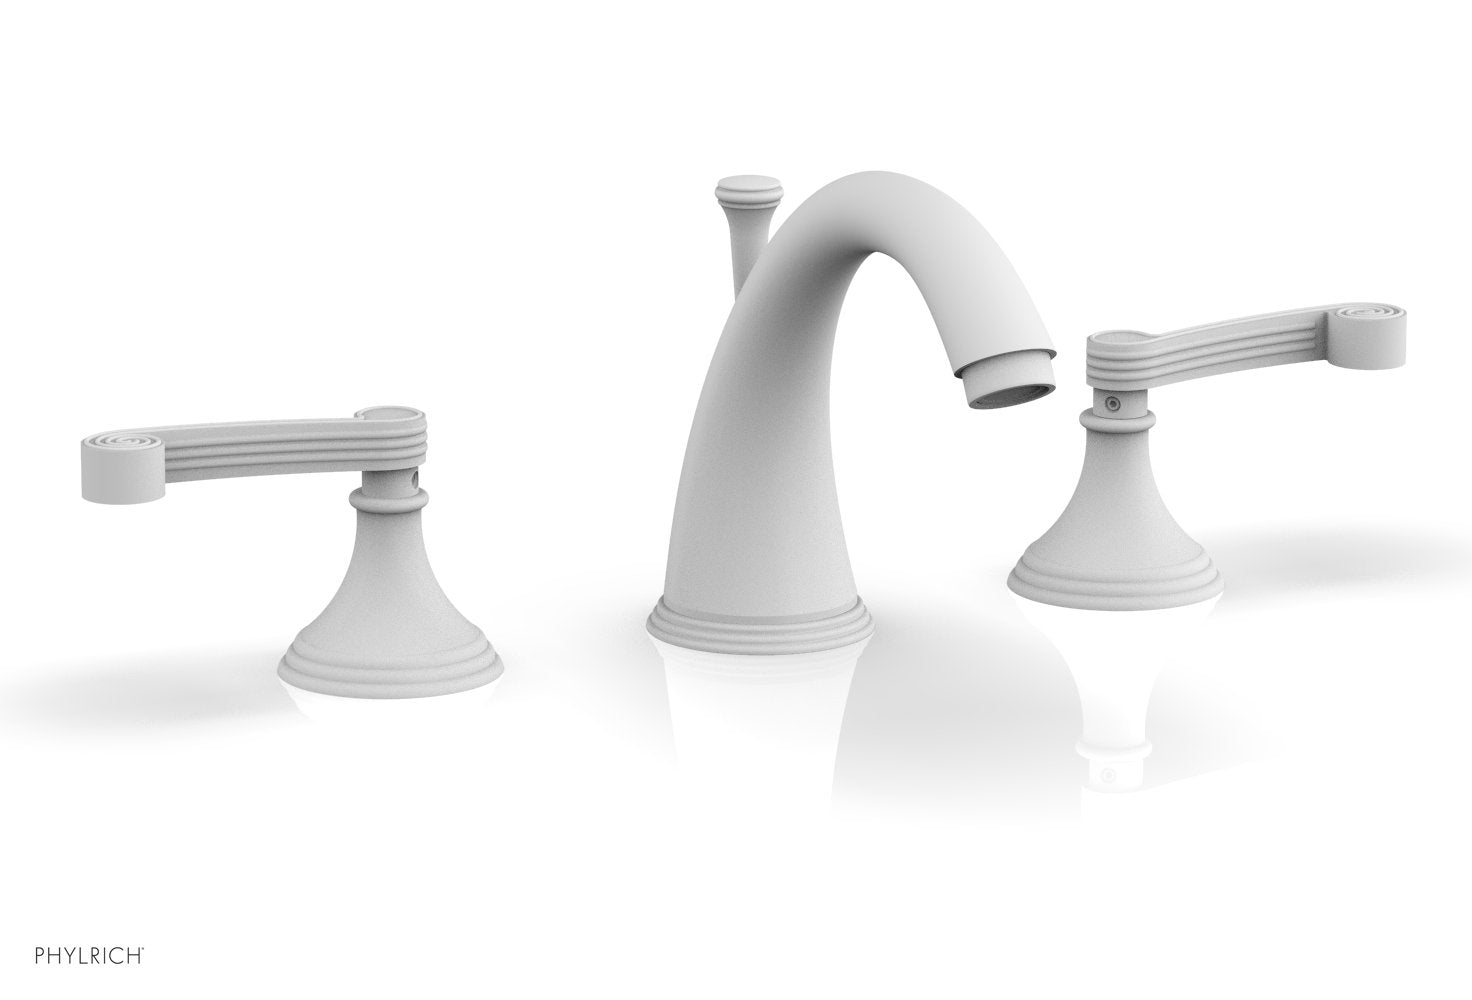 Phylrich 3RING Widespread Faucet